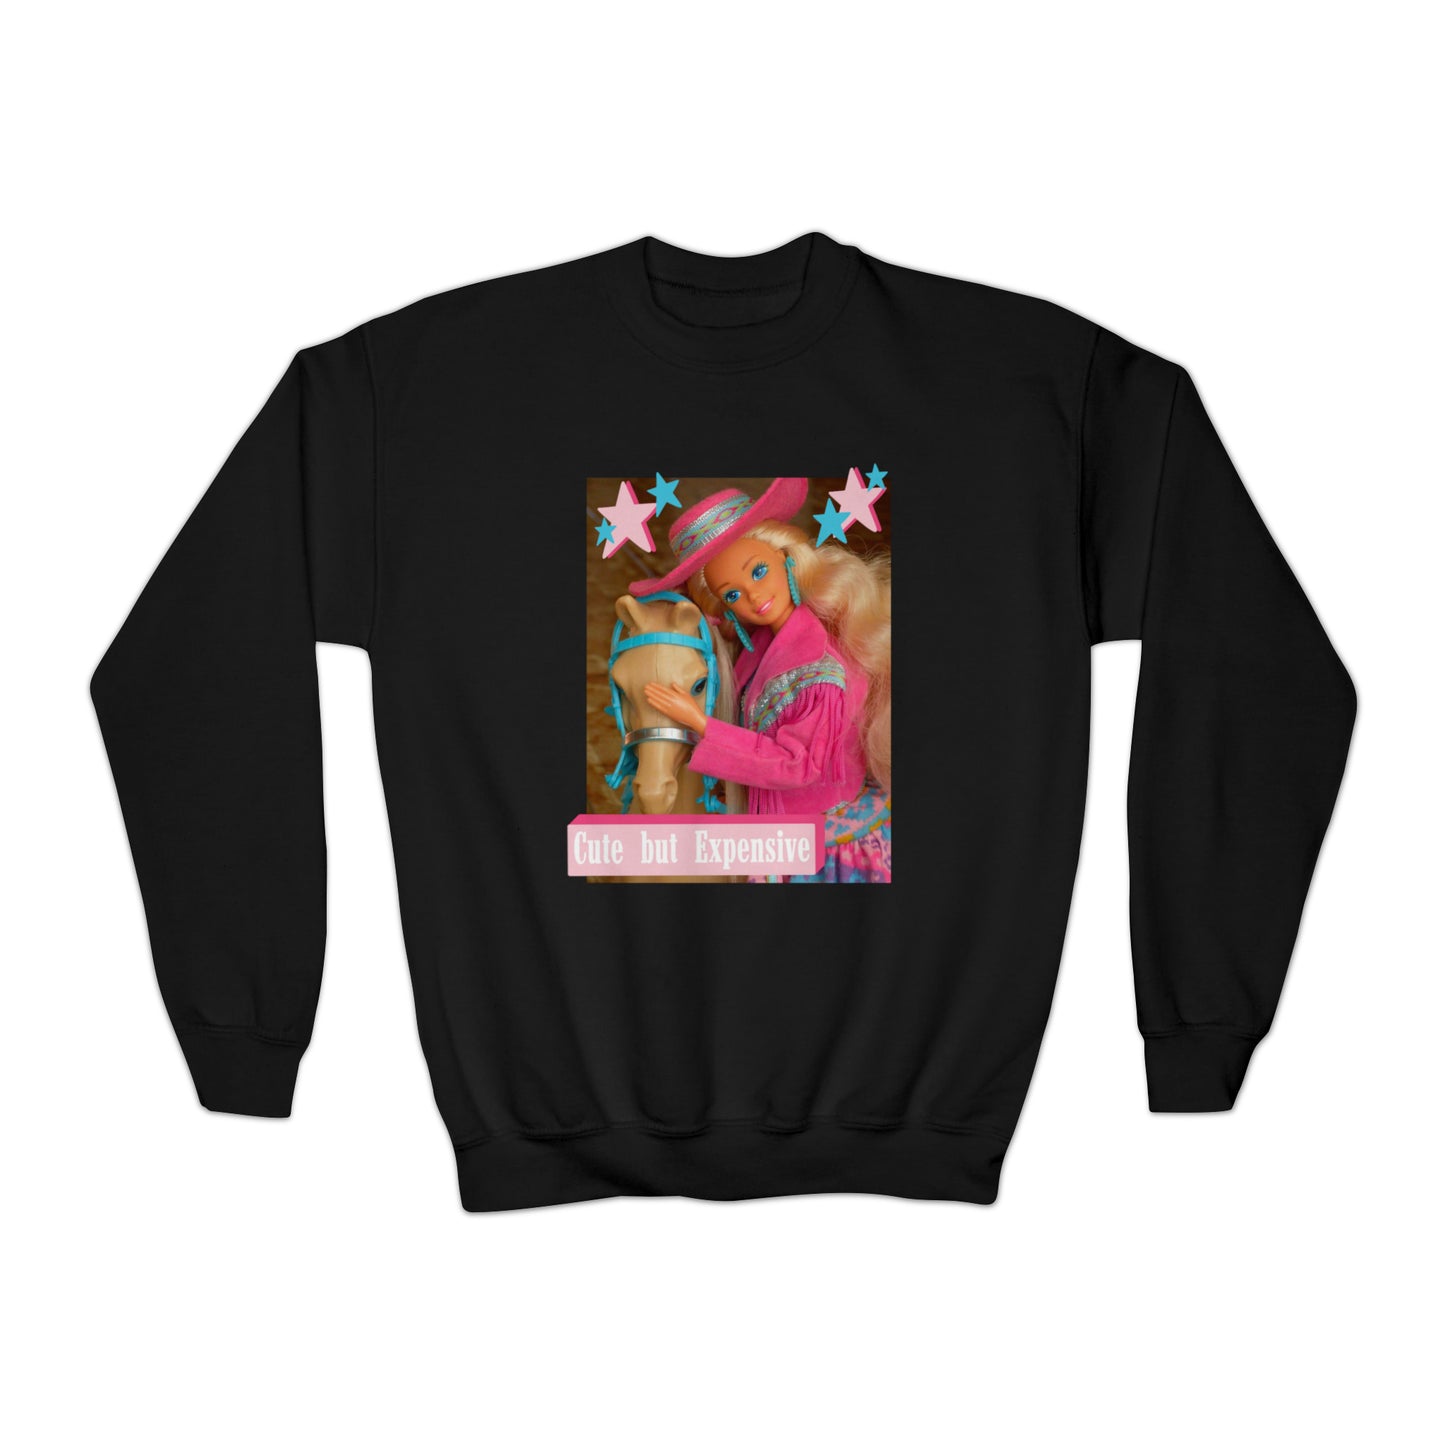 Cute but Expensive // YOUTH CREWNECK